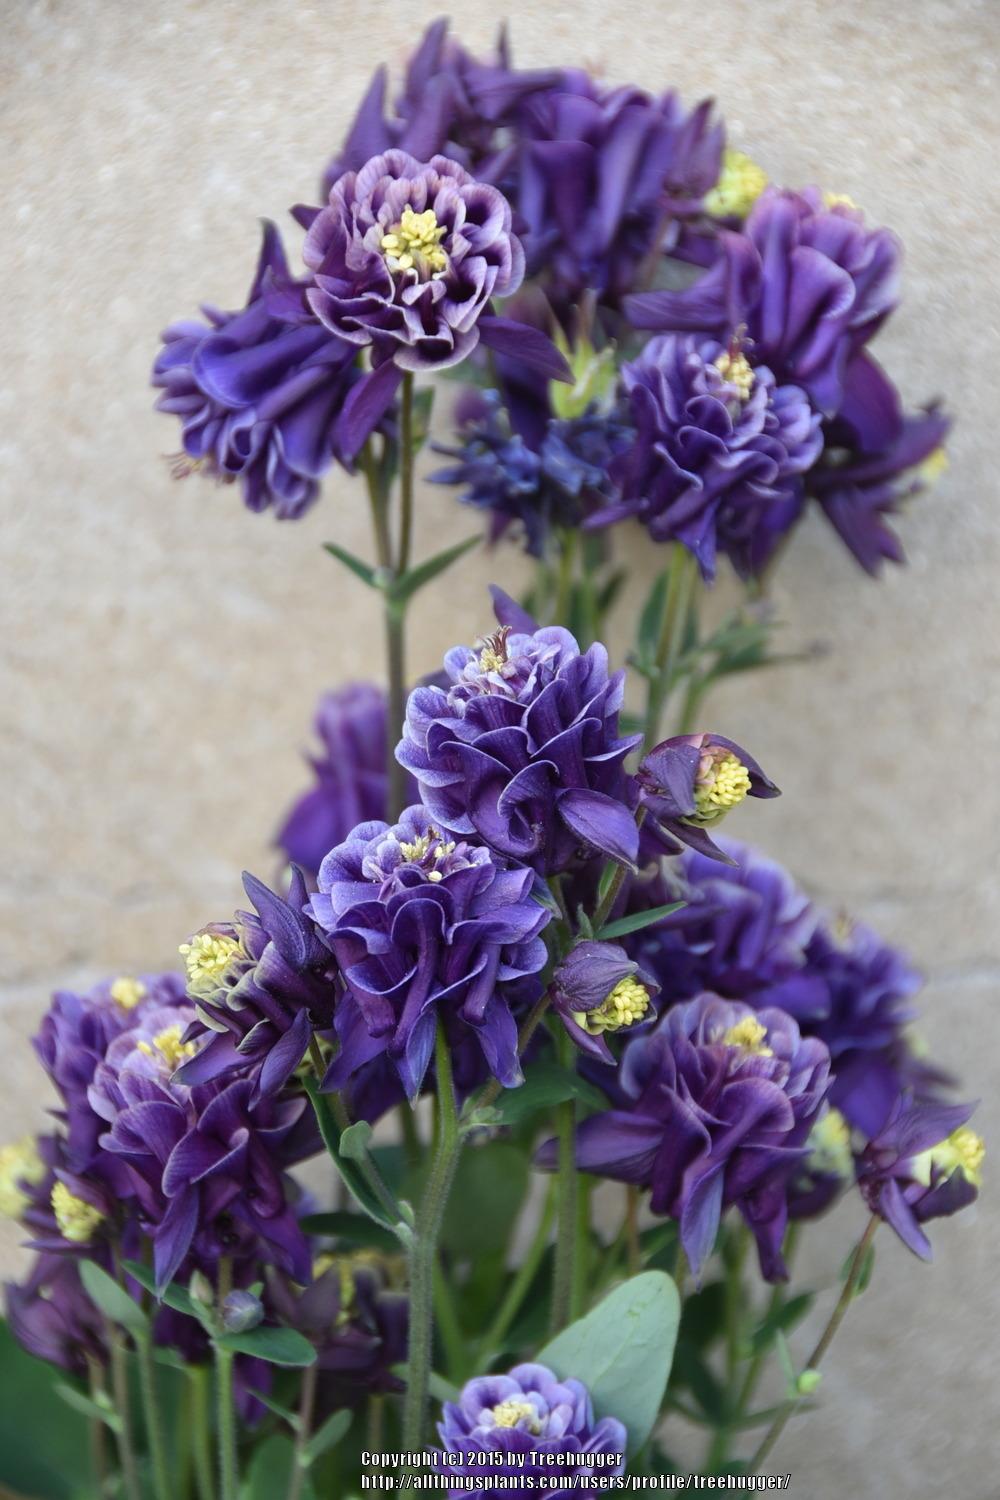 Photo of Columbine (Aquilegia vulgaris 'Winky Double Blue and White') uploaded by treehugger